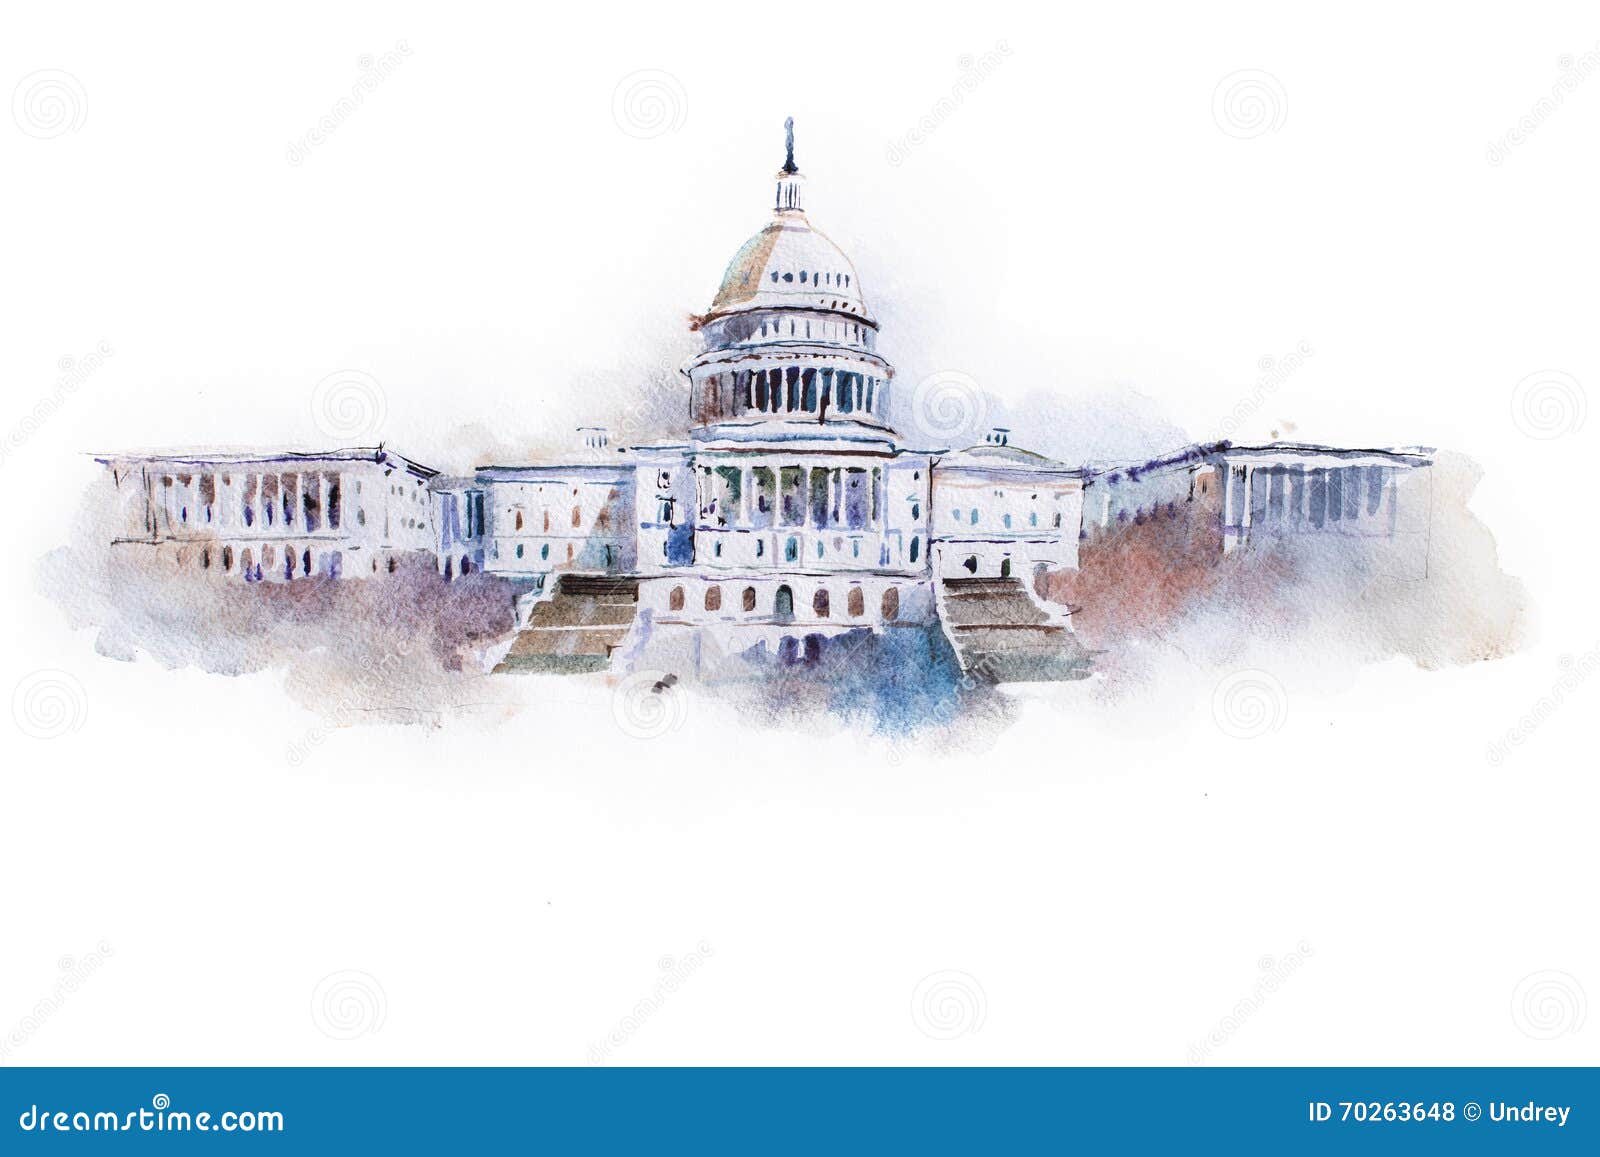 watercolor drawing of the white house in washington dc